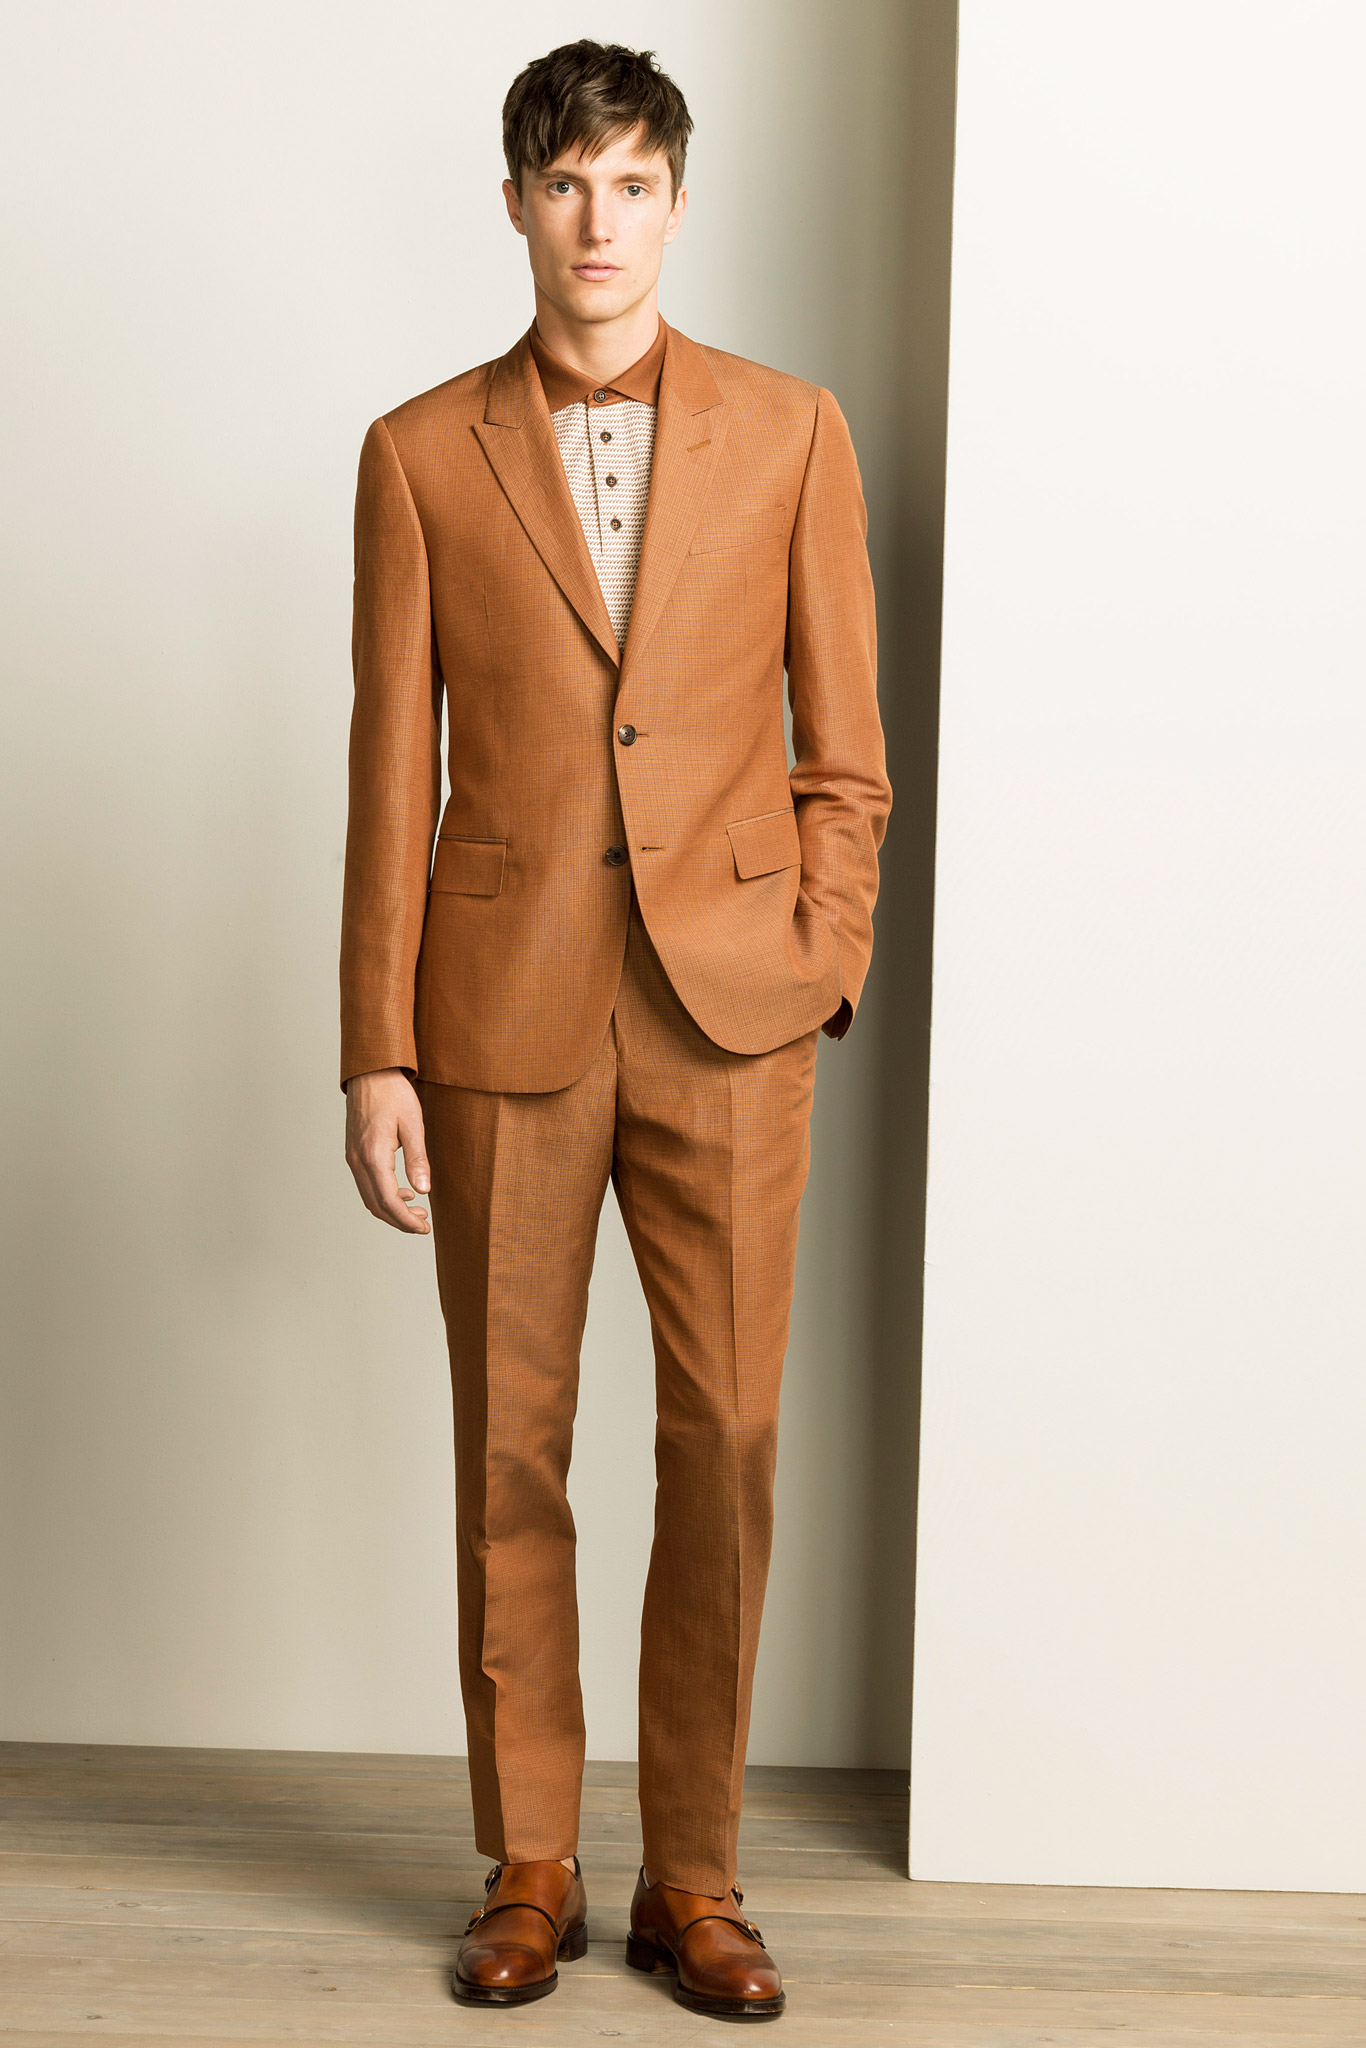 Gieves & Hawkes Spring 2016 Collection | MiKADO